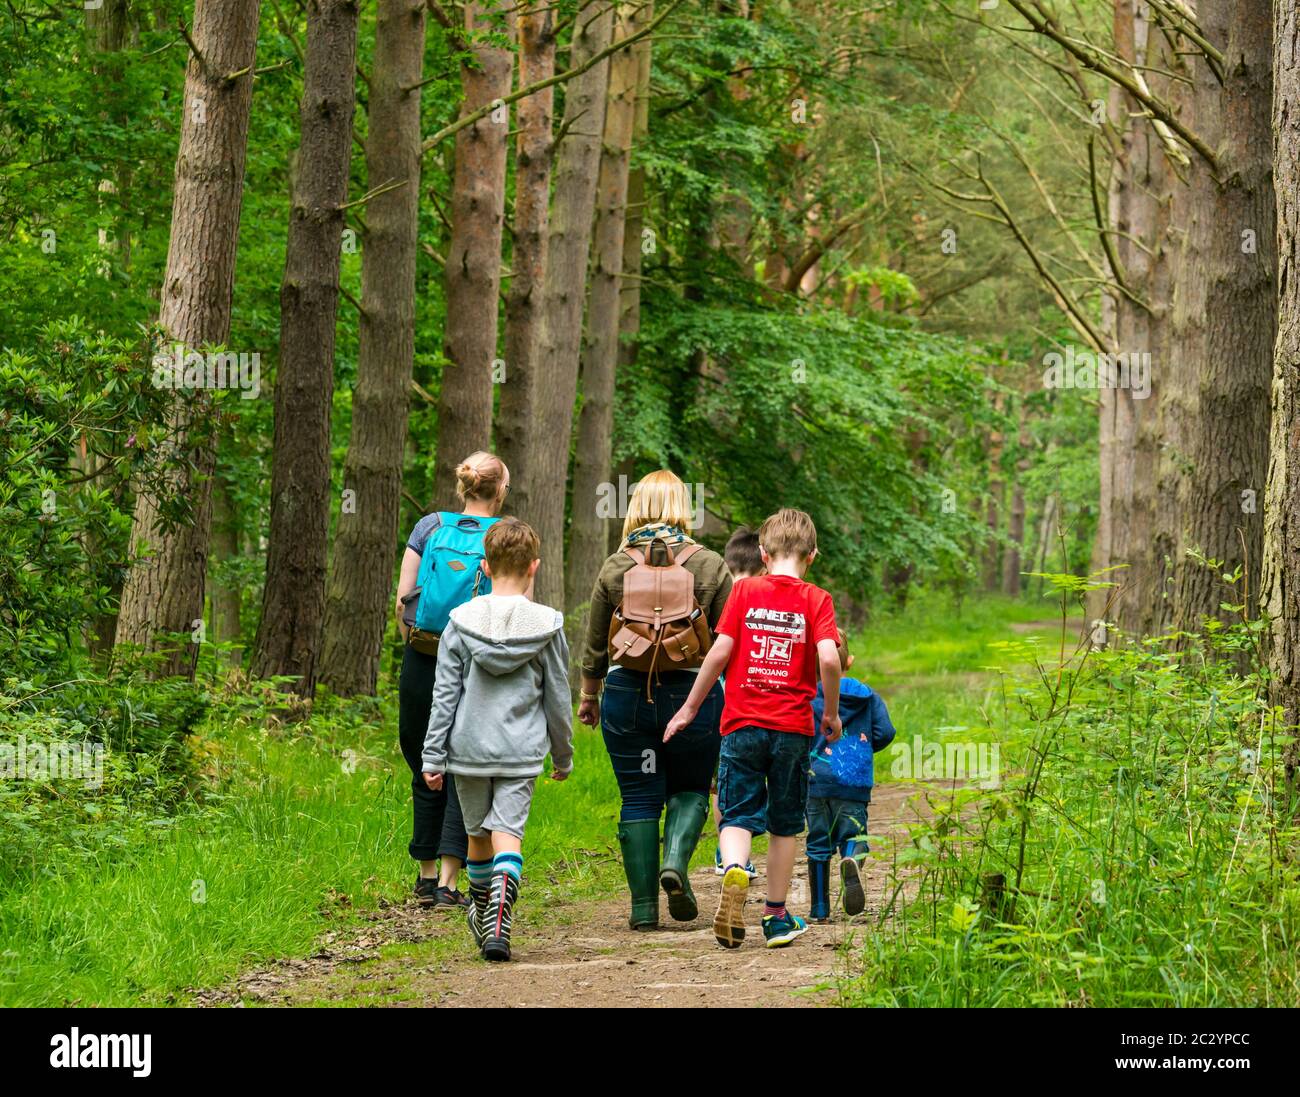 Mothers and children walking on forest trail in woodland with pine trees, Binning Wood, East Lothian, Scotland, UK Stock Photo